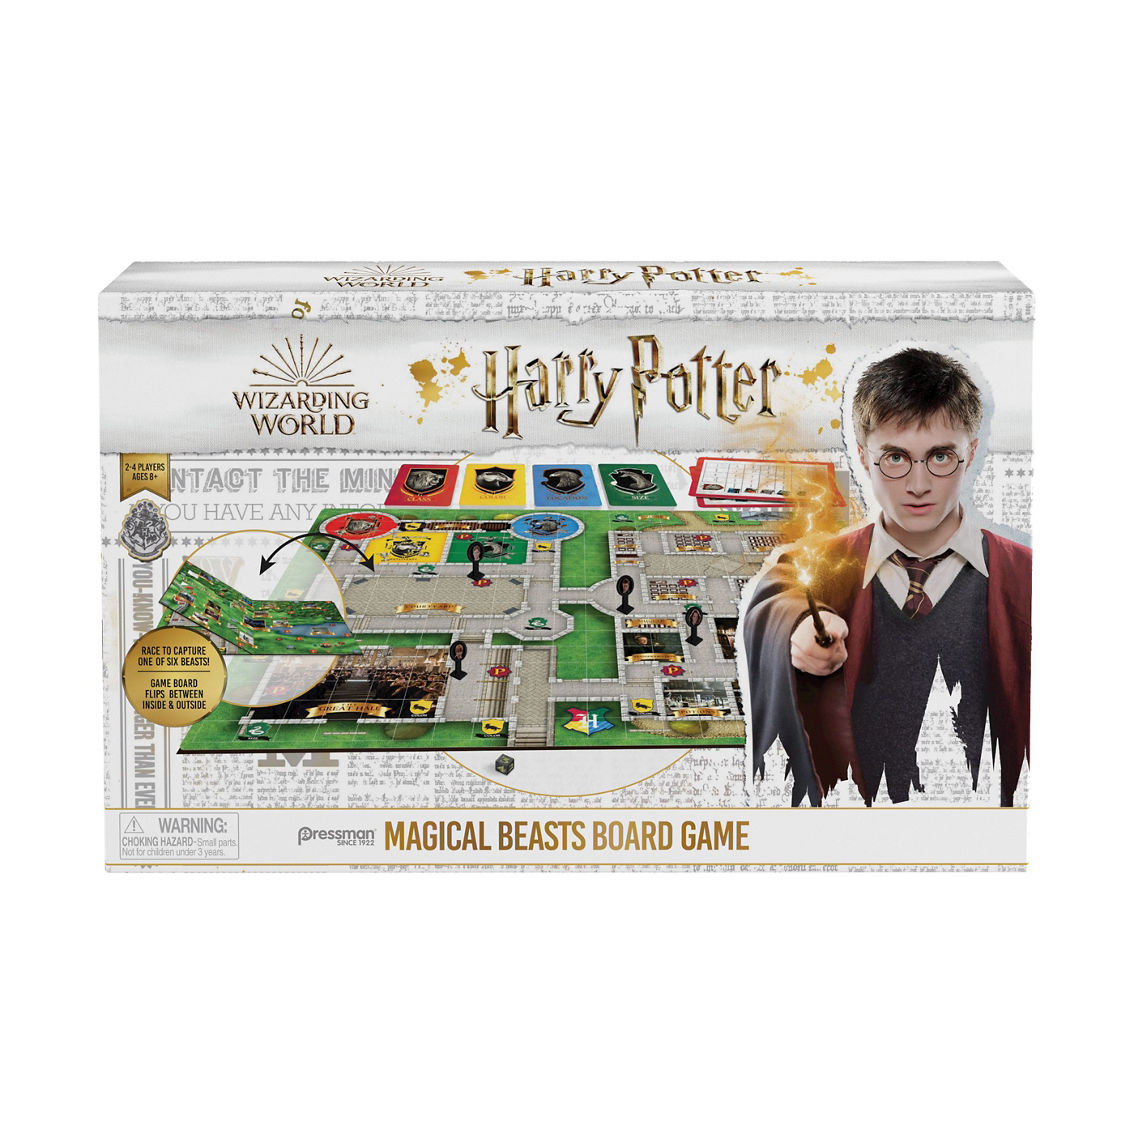 Pressman Toy Harry Potter Magical Beasts Board Game - Image 5 of 5